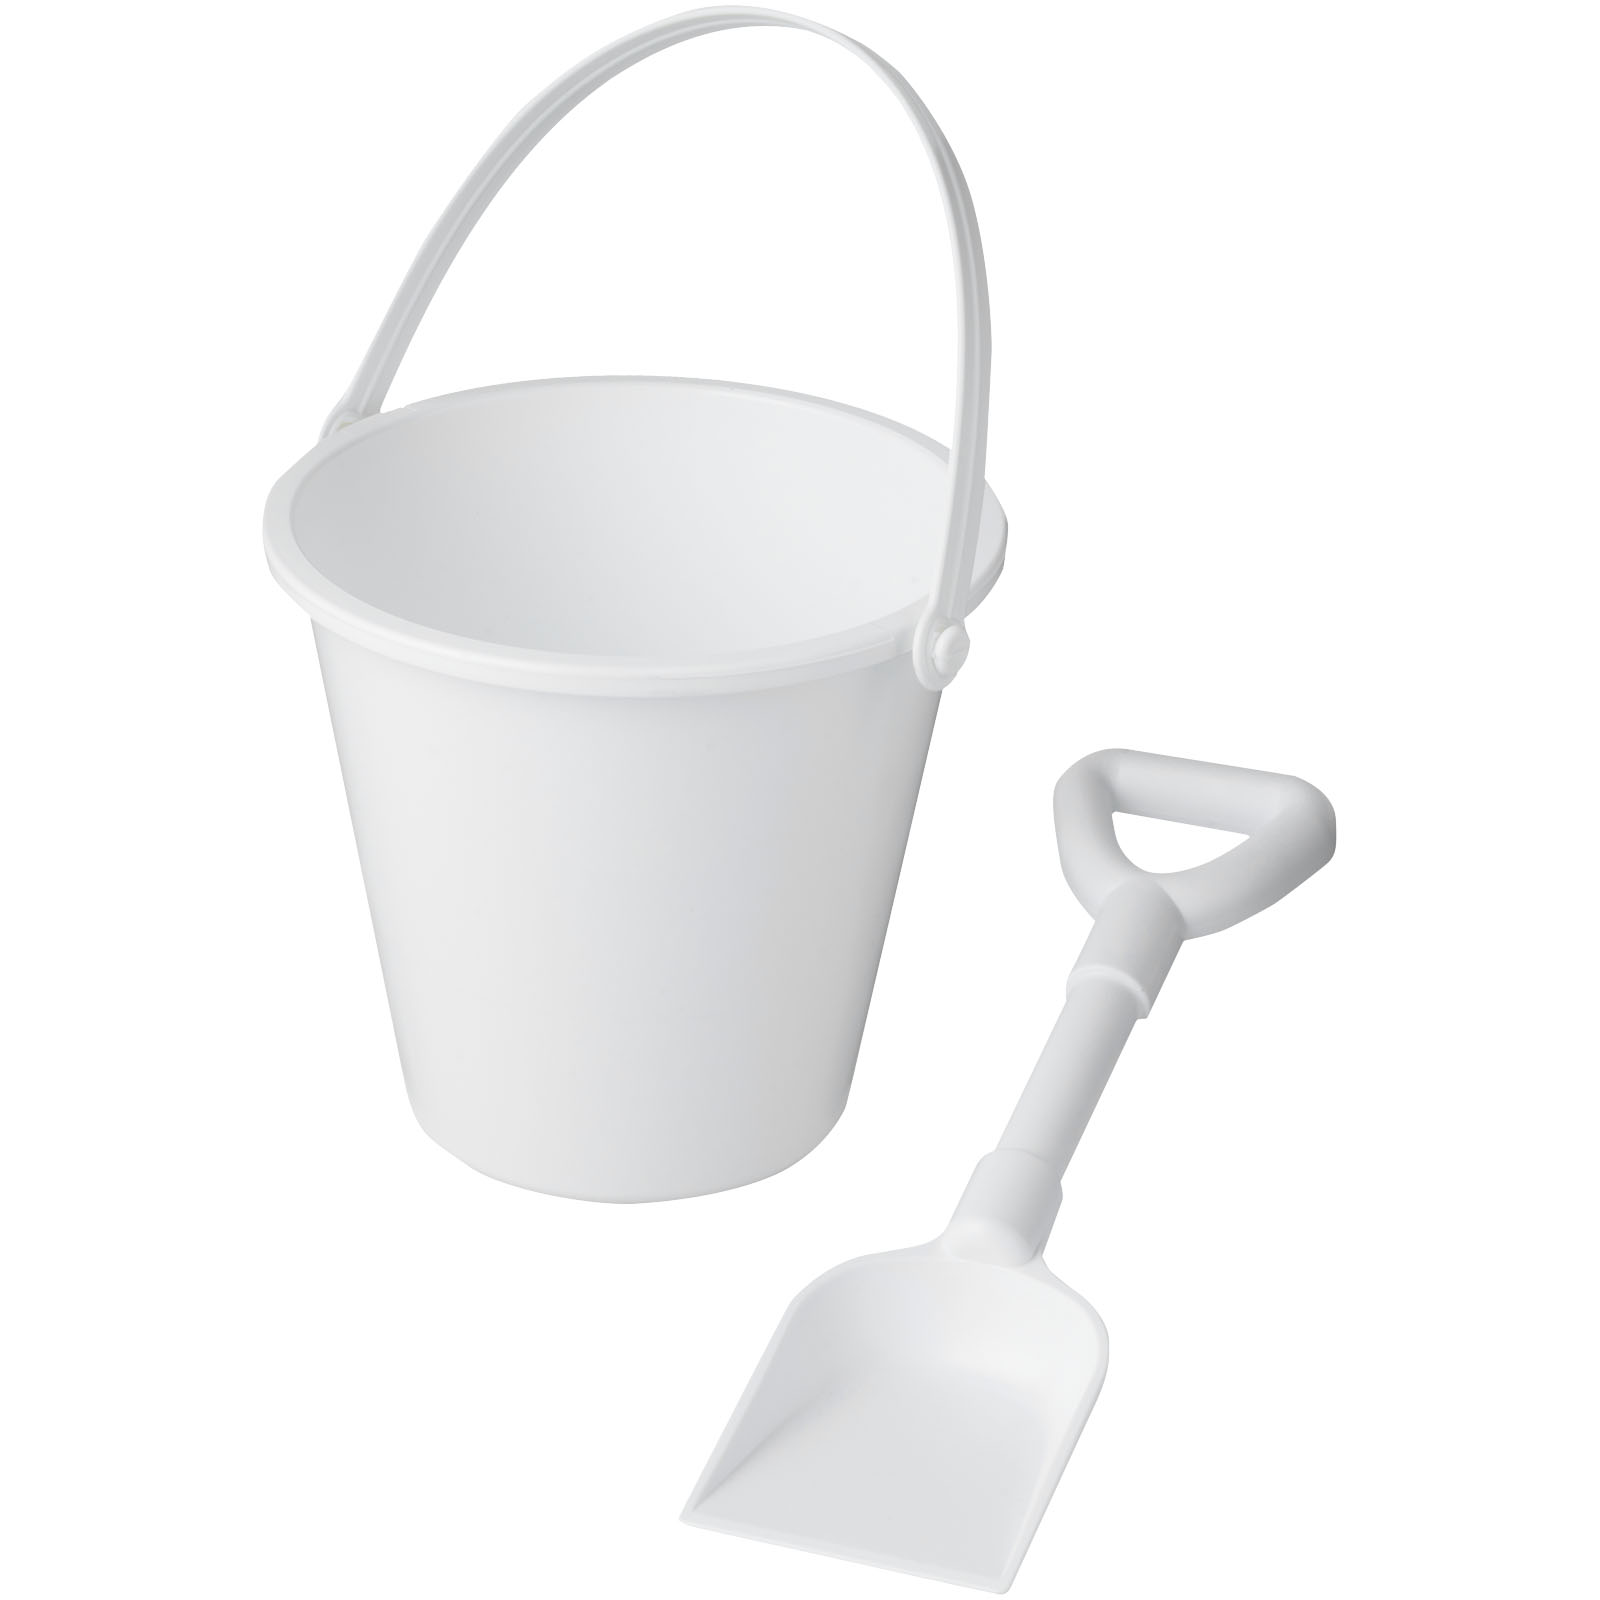 Beach Items - Tides recycled beach bucket and spade